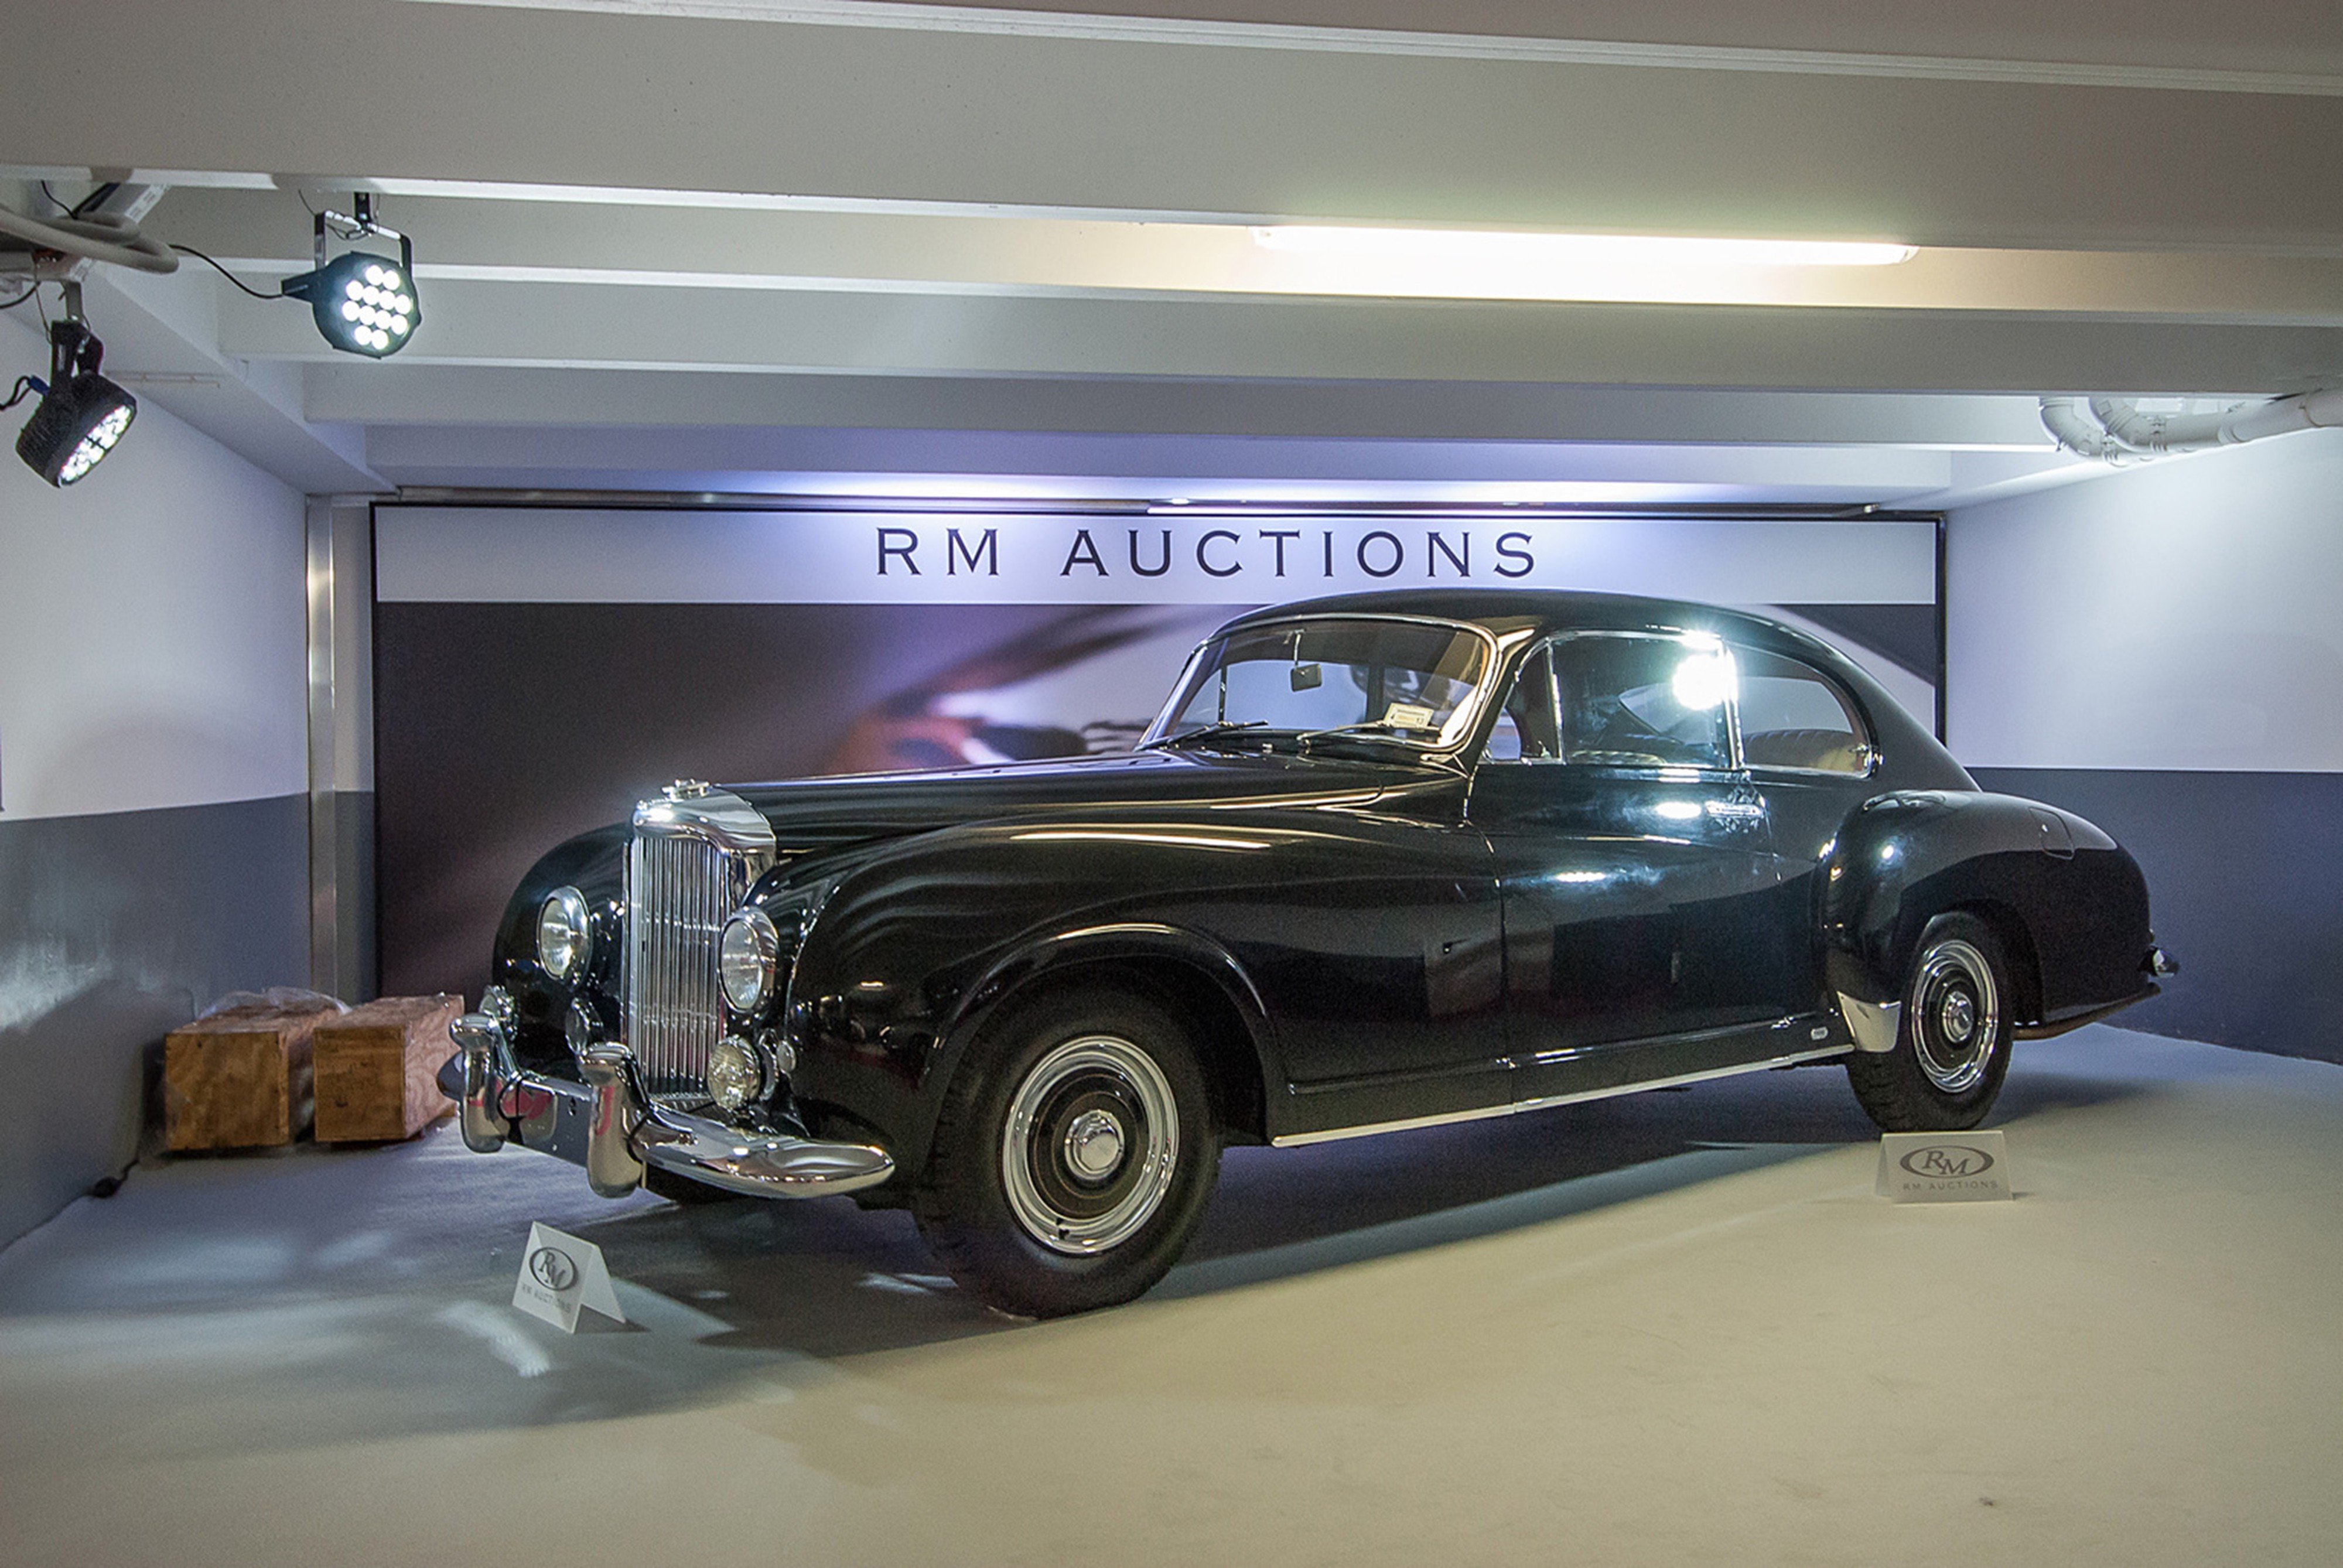 rmand039s, Auction, In, Monaco, Classic, Car, 1954, Bentley, R type, Continental, Fastback, Sports, Saloon, By, Franay, 4000x2677 Wallpaper